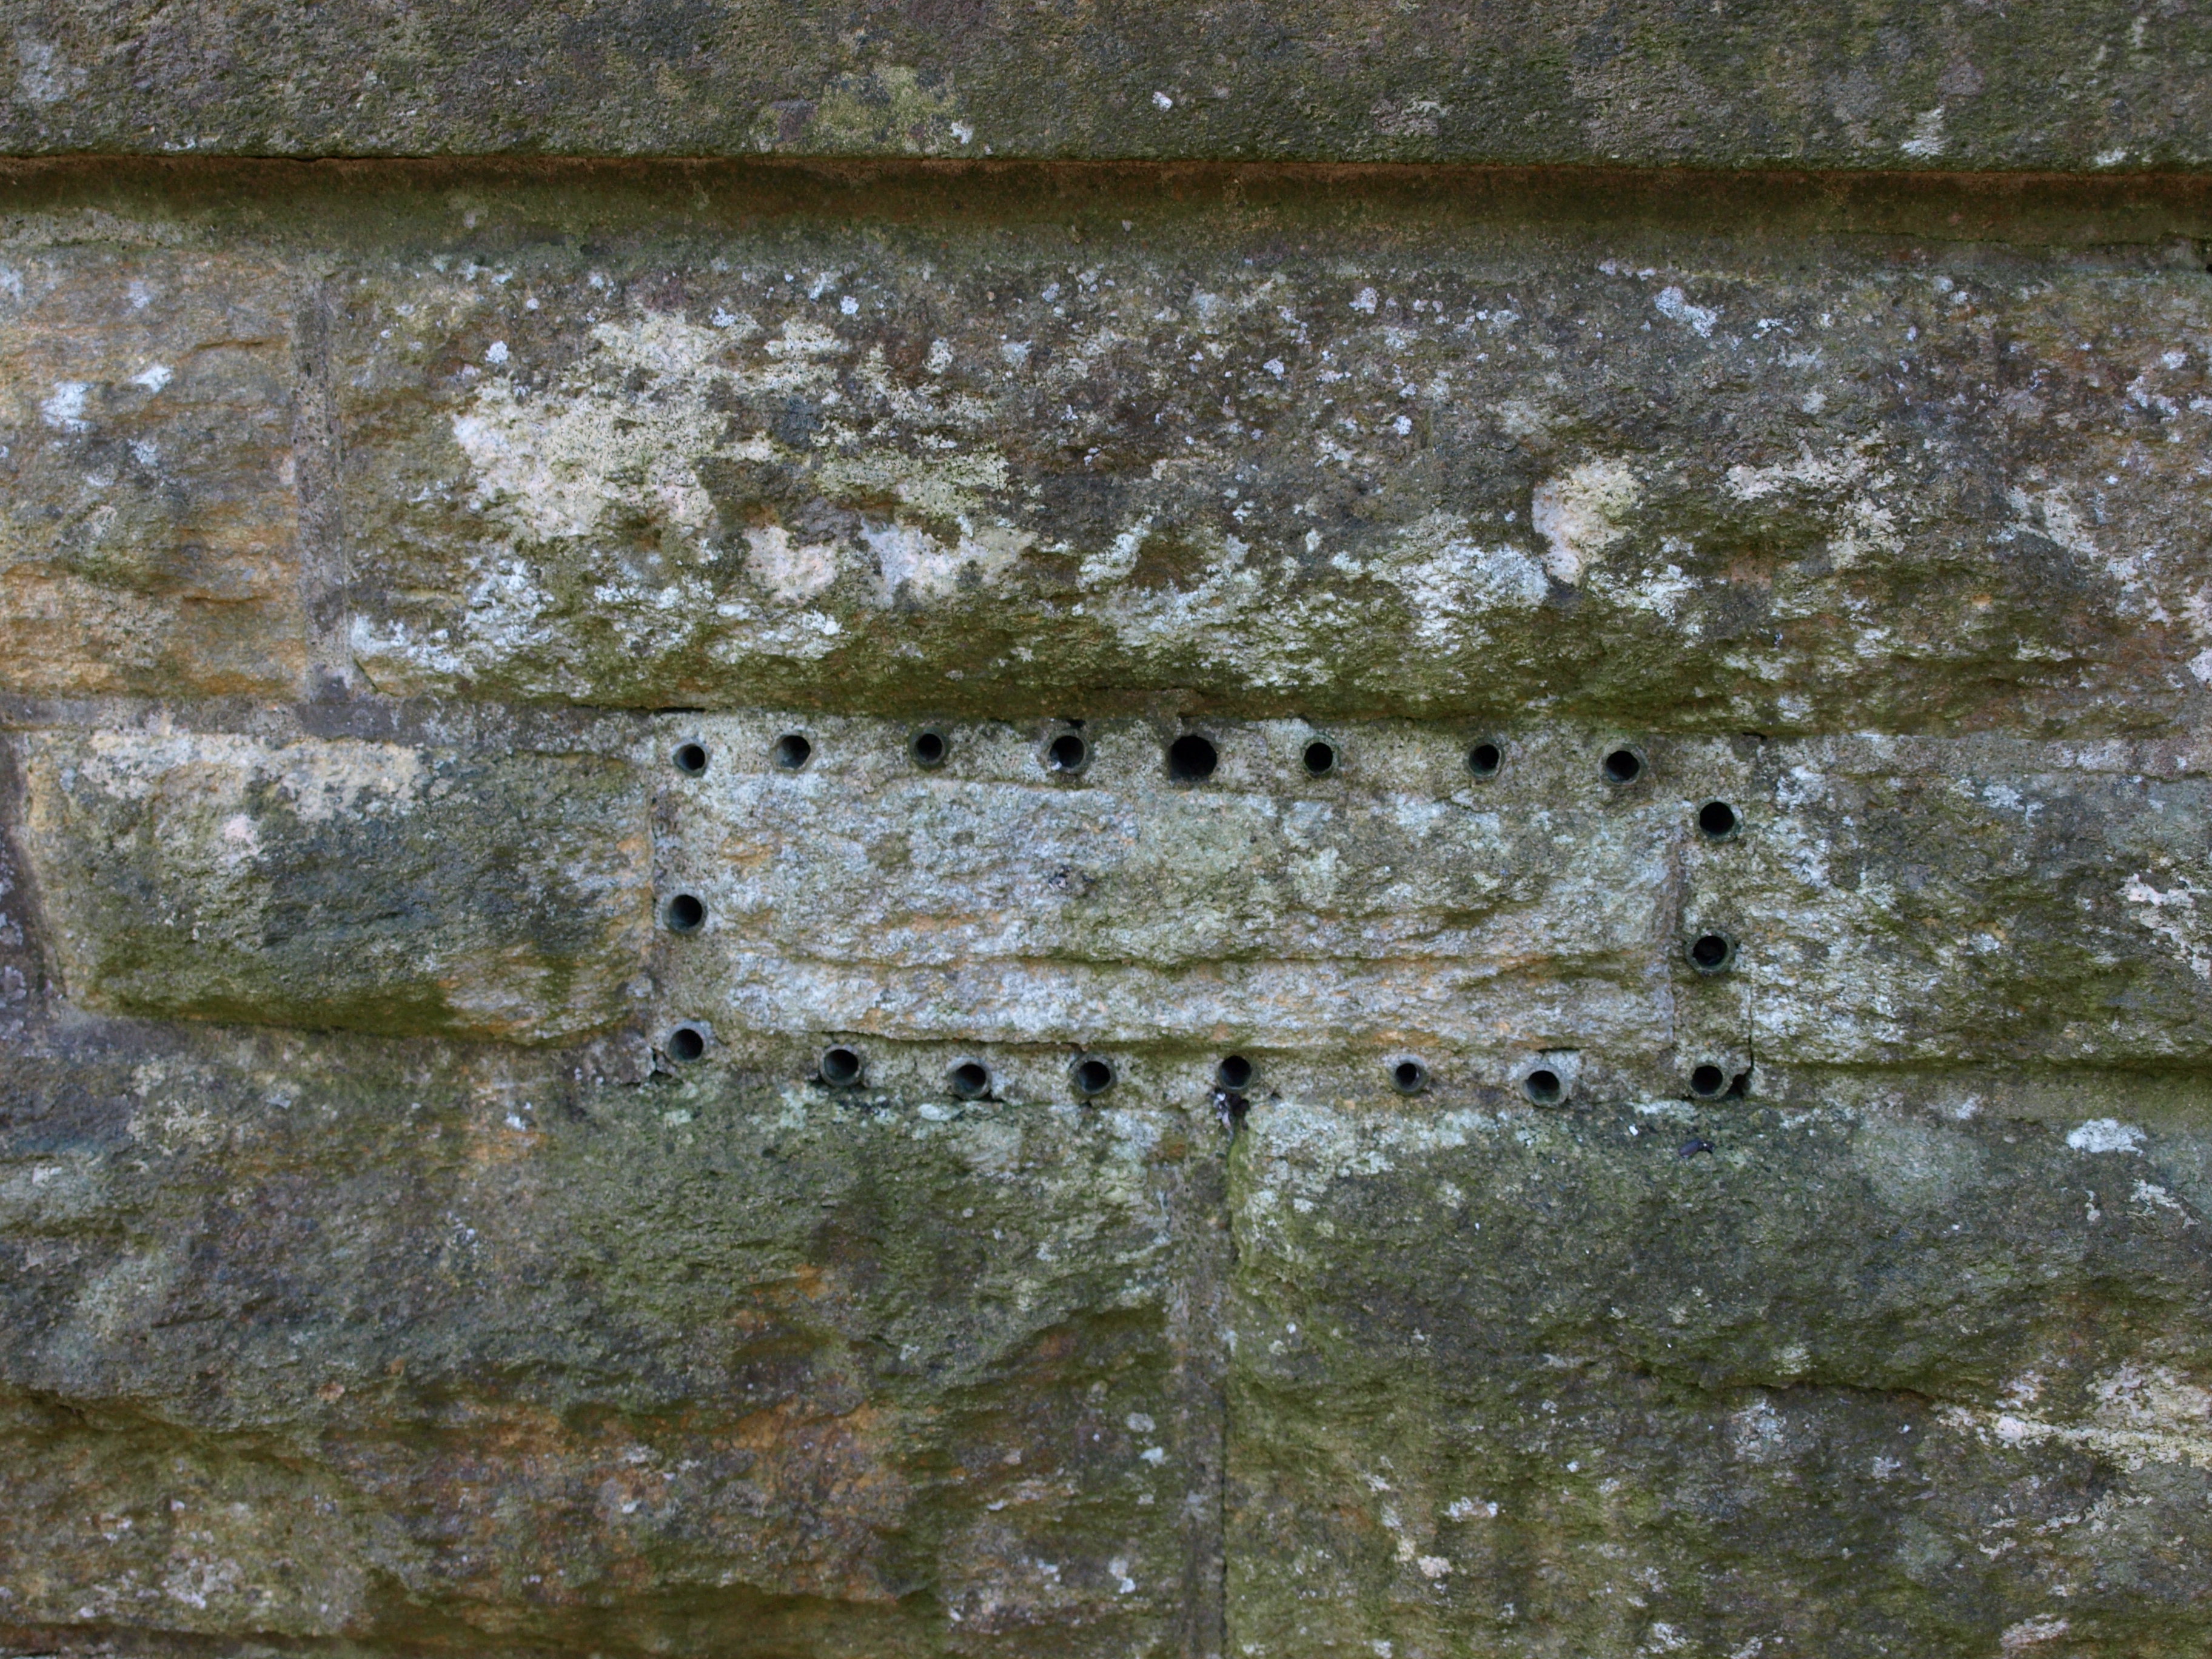 Vent holes in the side of the mausoleum